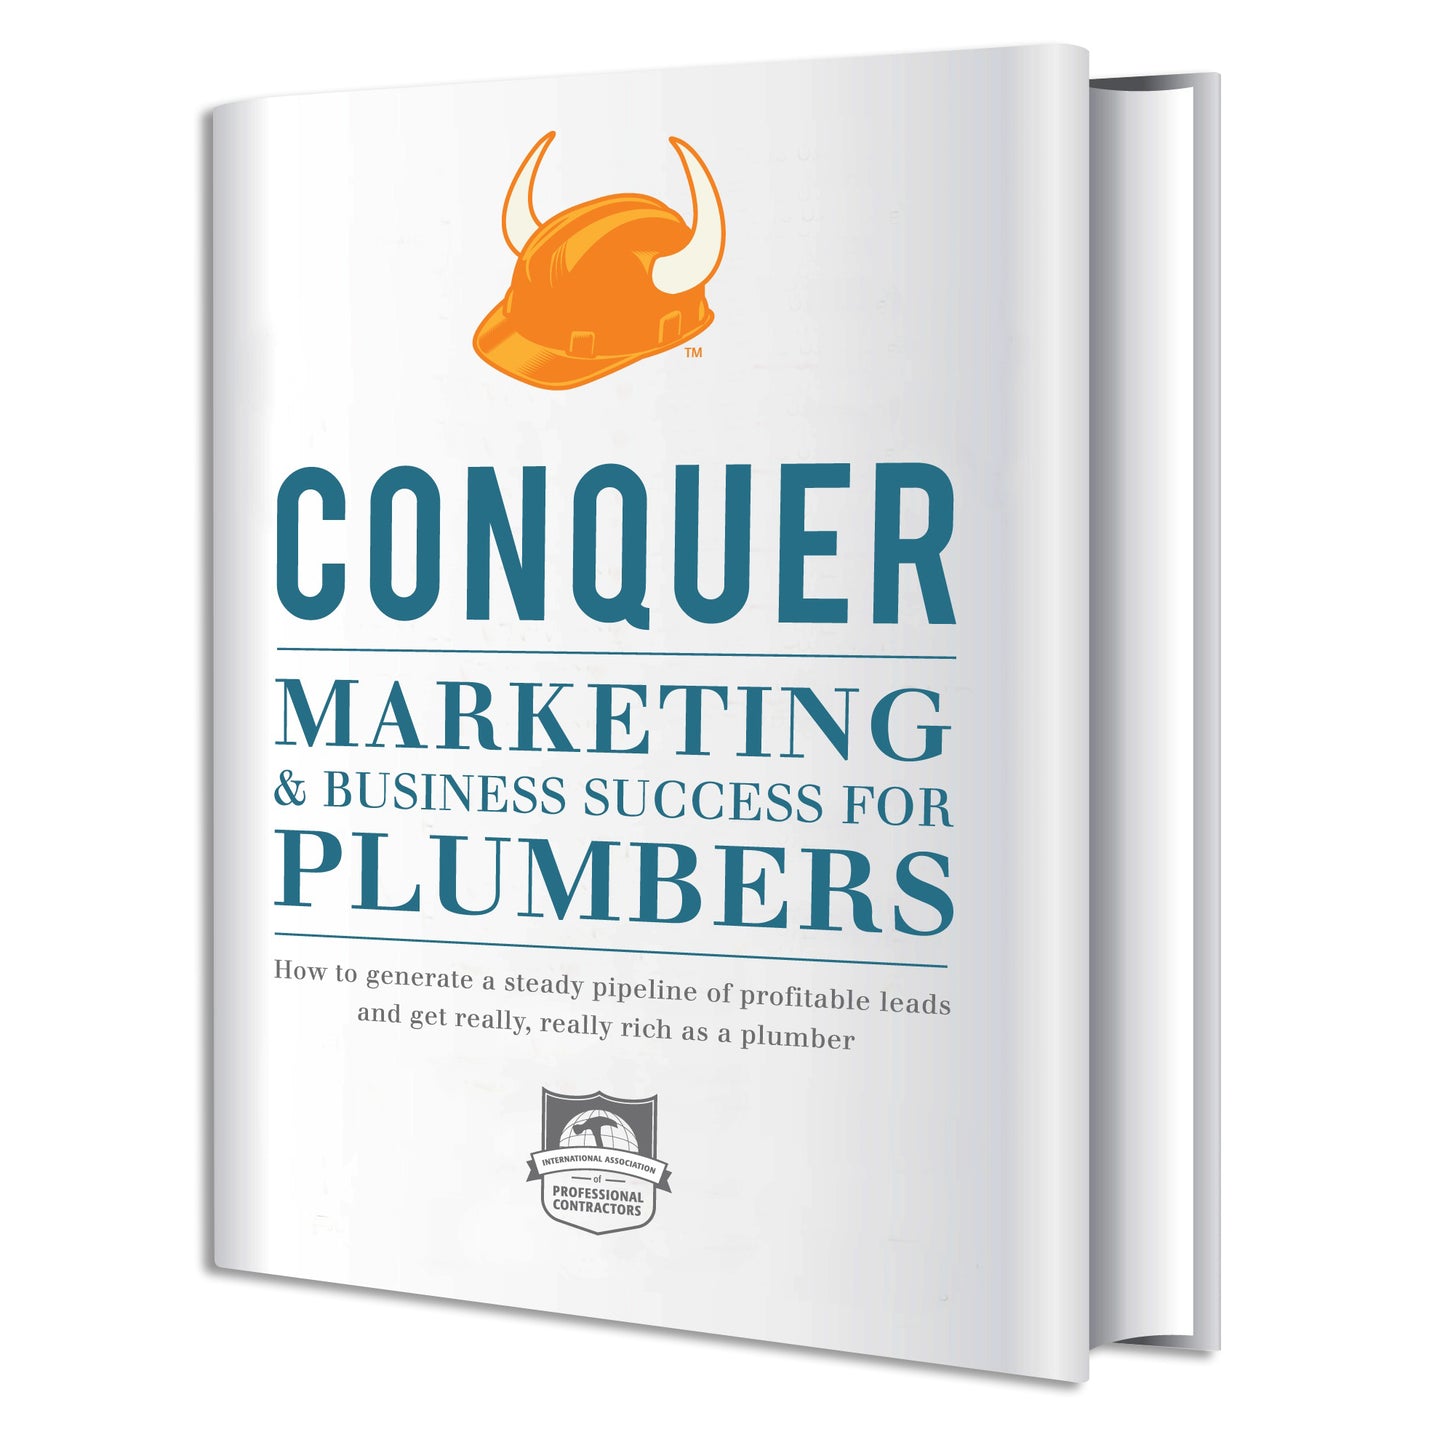 CONQUER Marketing and Business Success for Plumbers PDF